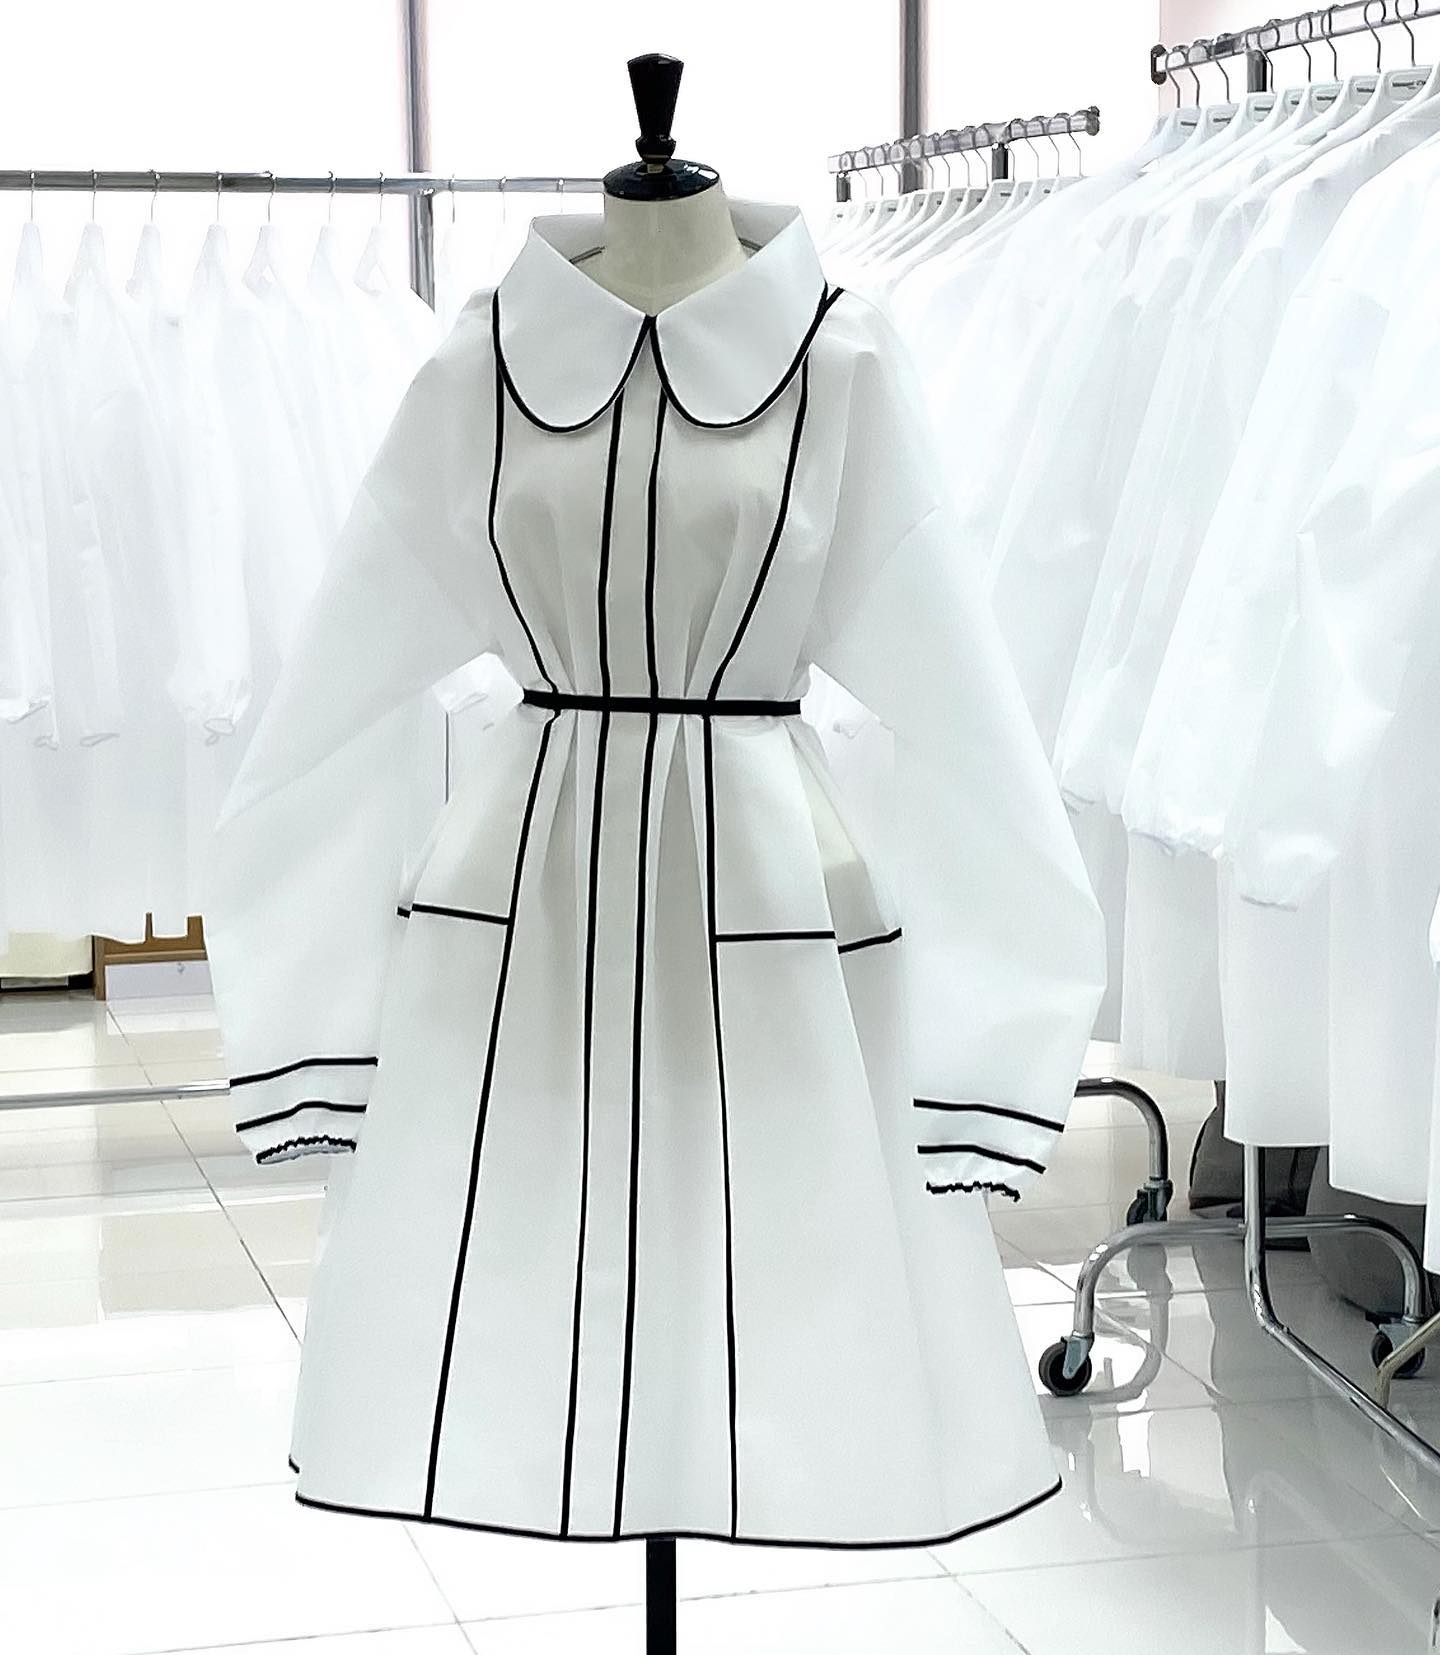 Michael Cinco protective lab gown design in black and white